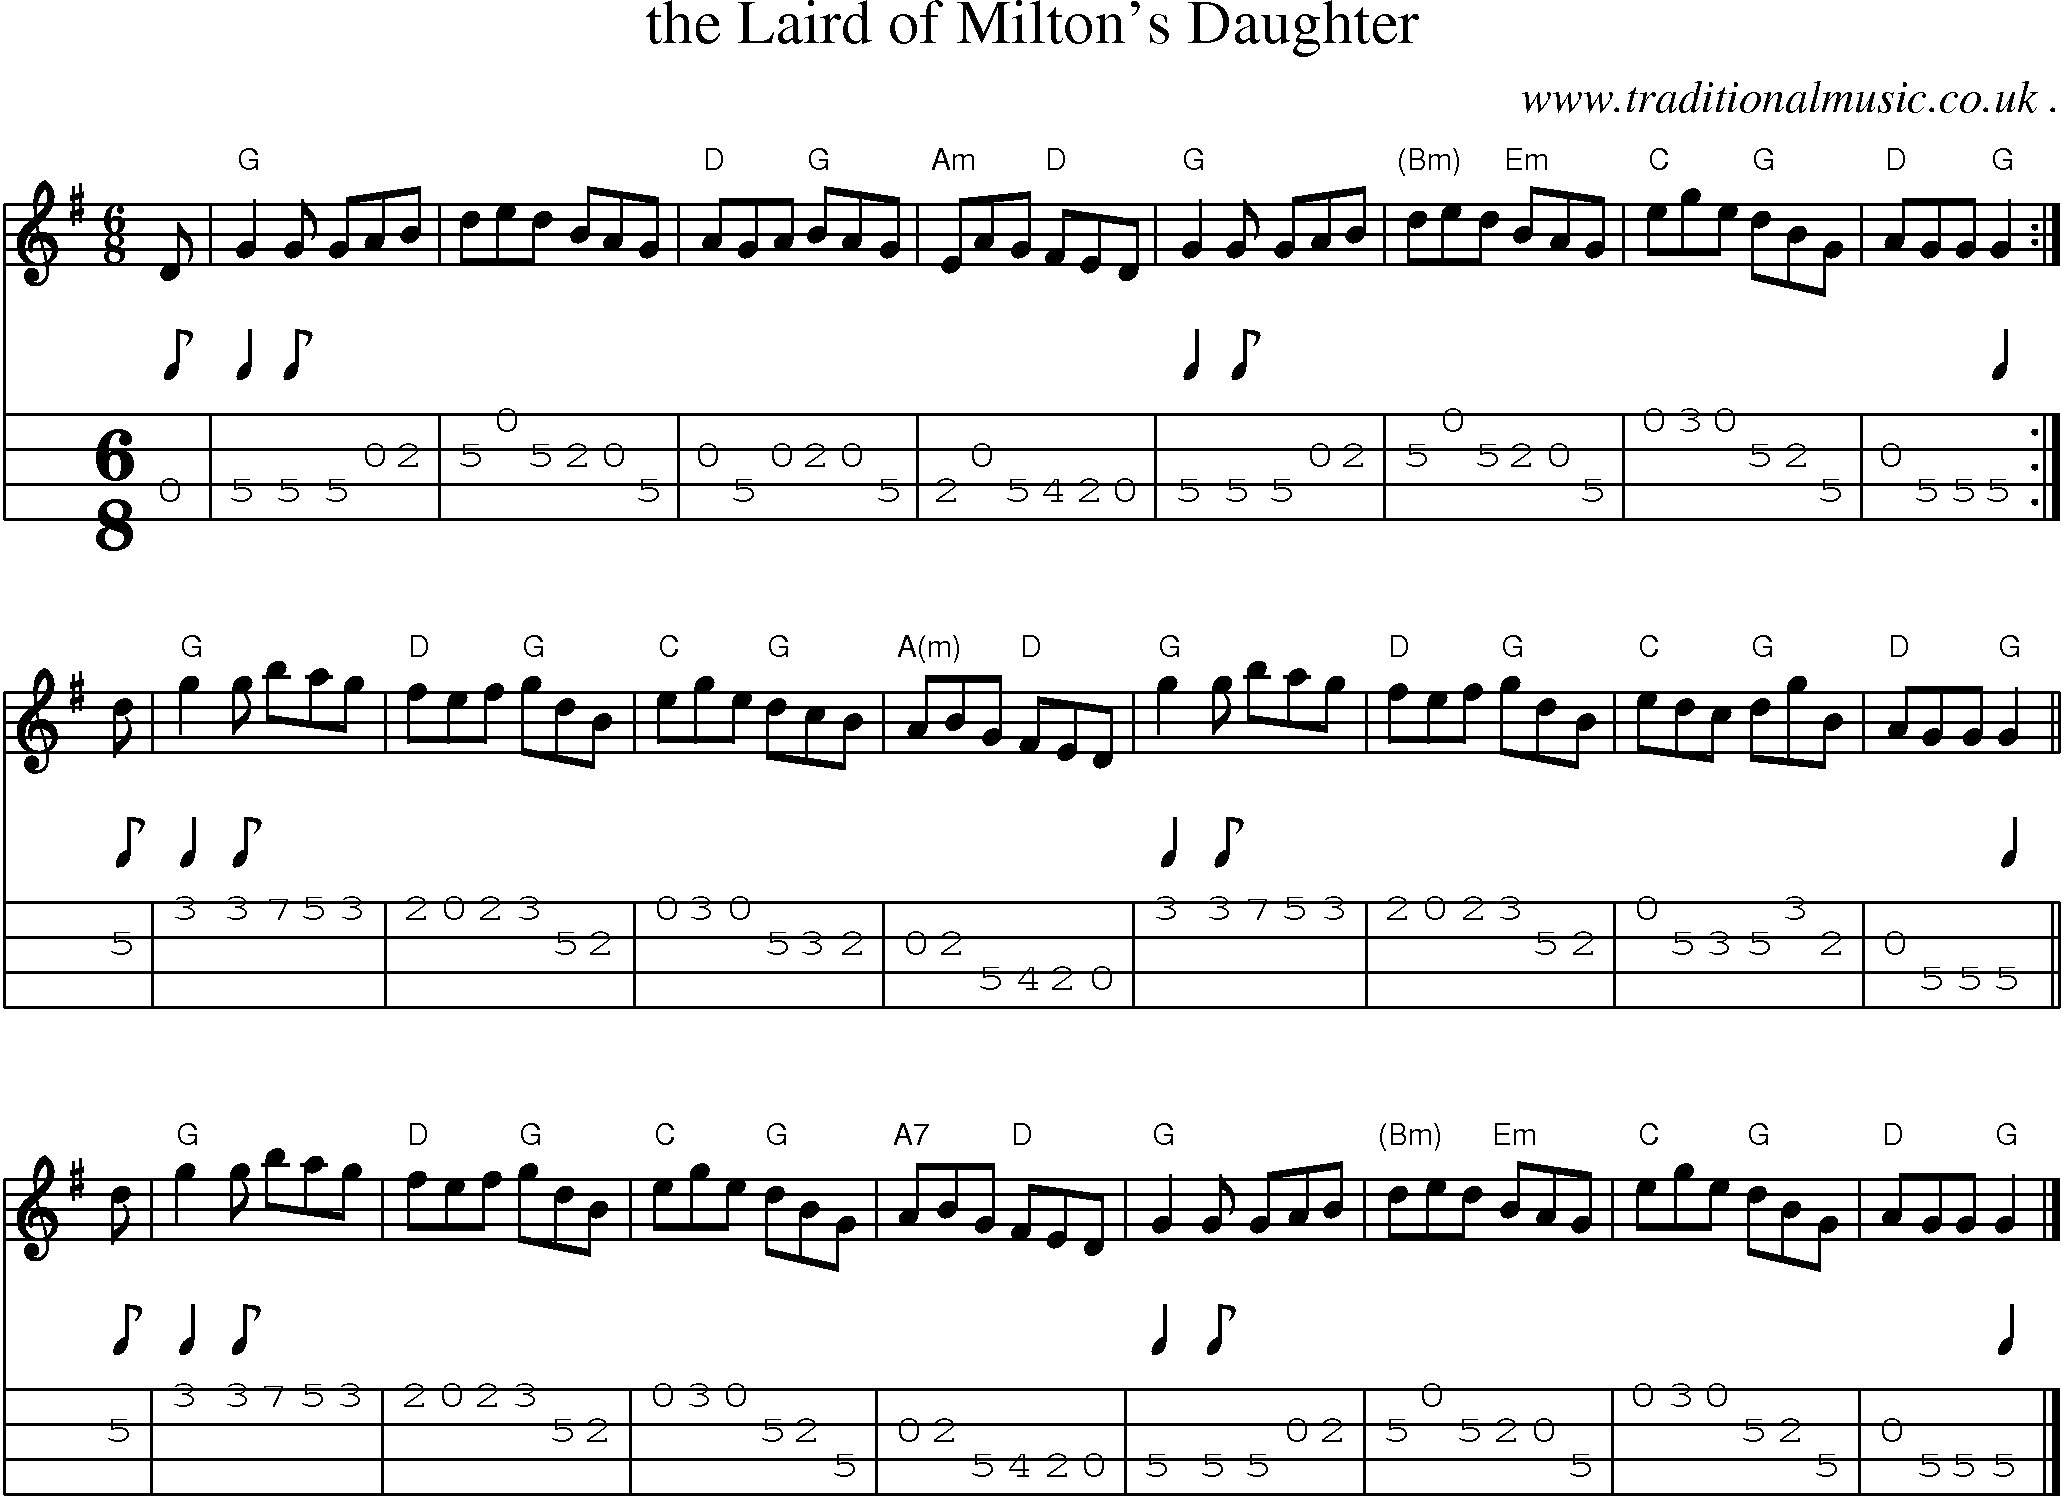 Sheet-music  score, Chords and Mandolin Tabs for The Laird Of Miltons Daughter